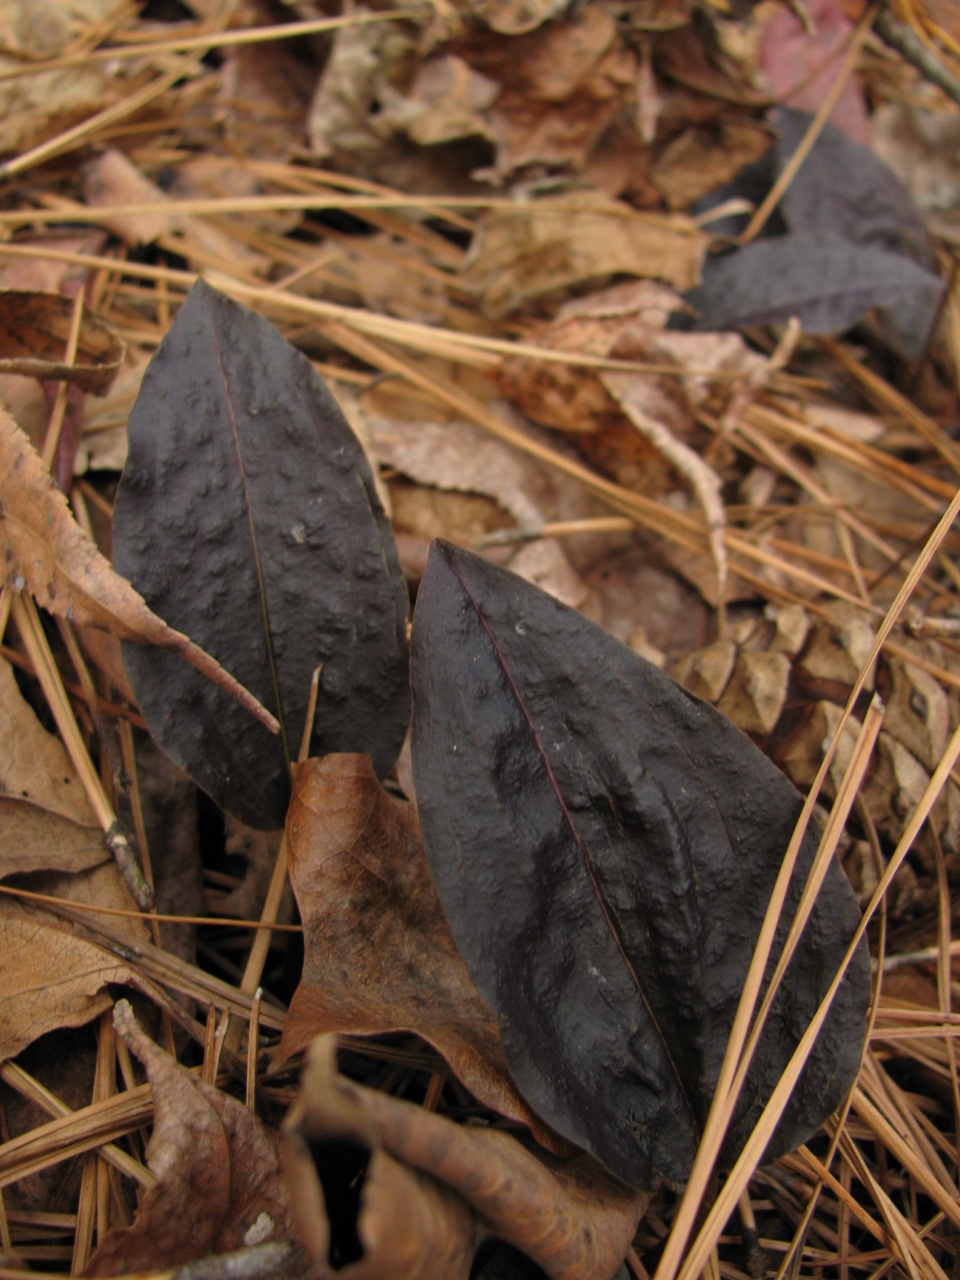 The Scientific Name is Tipularia discolor. You will likely hear them called Cranefly Orchid, Crippled Cranefly. This picture shows the Leaves can be quite variable in color, ranging from green to almost black. of Tipularia discolor